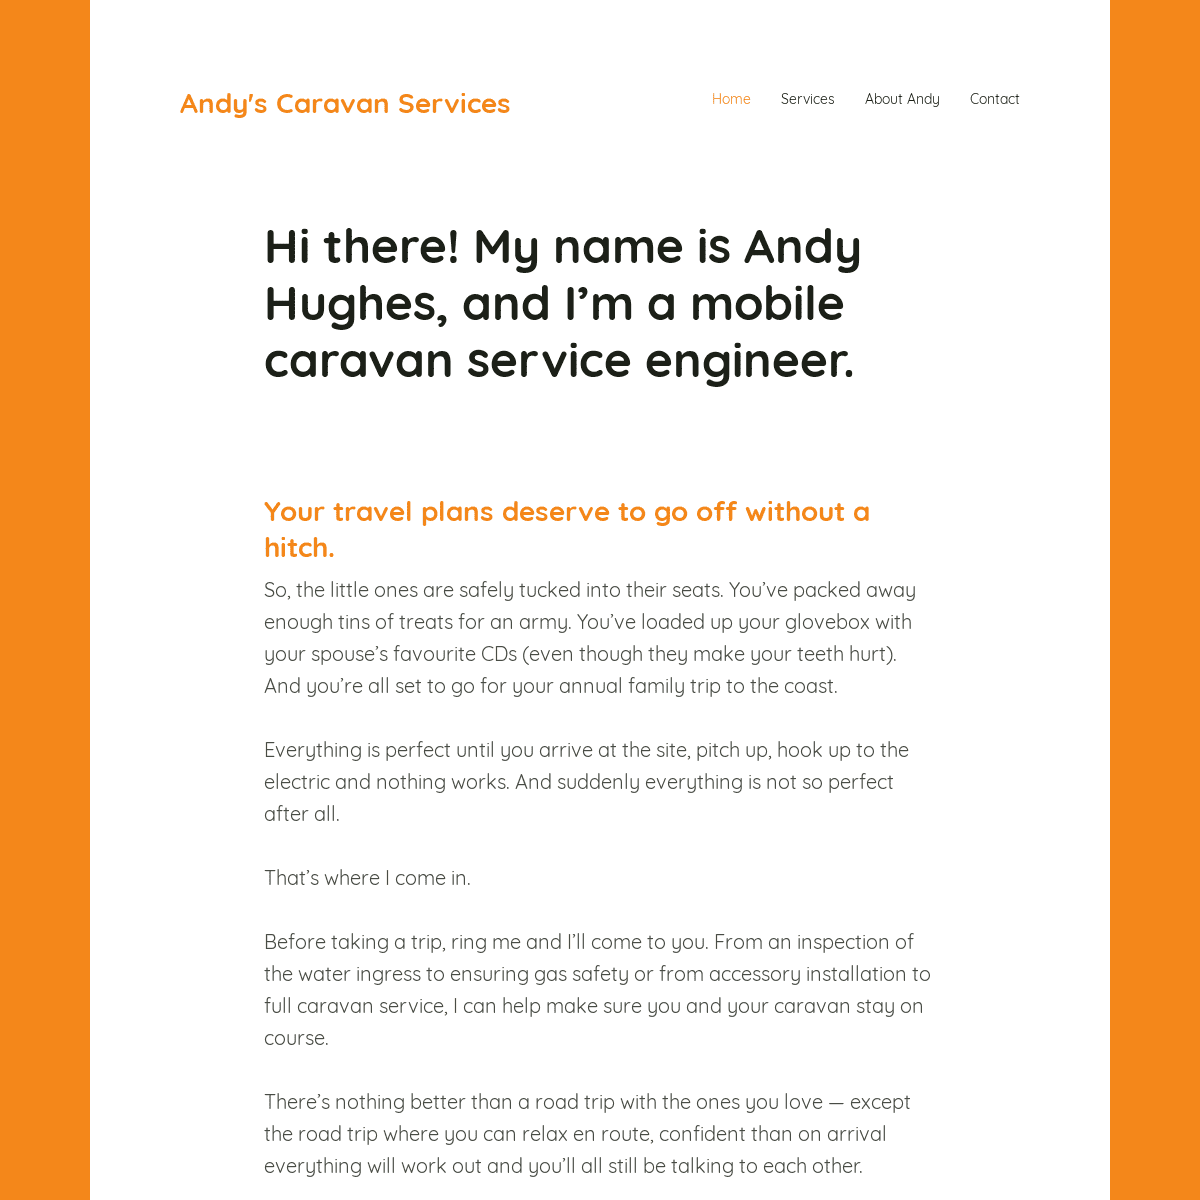 A complete backup of andyscaravanservices.co.uk